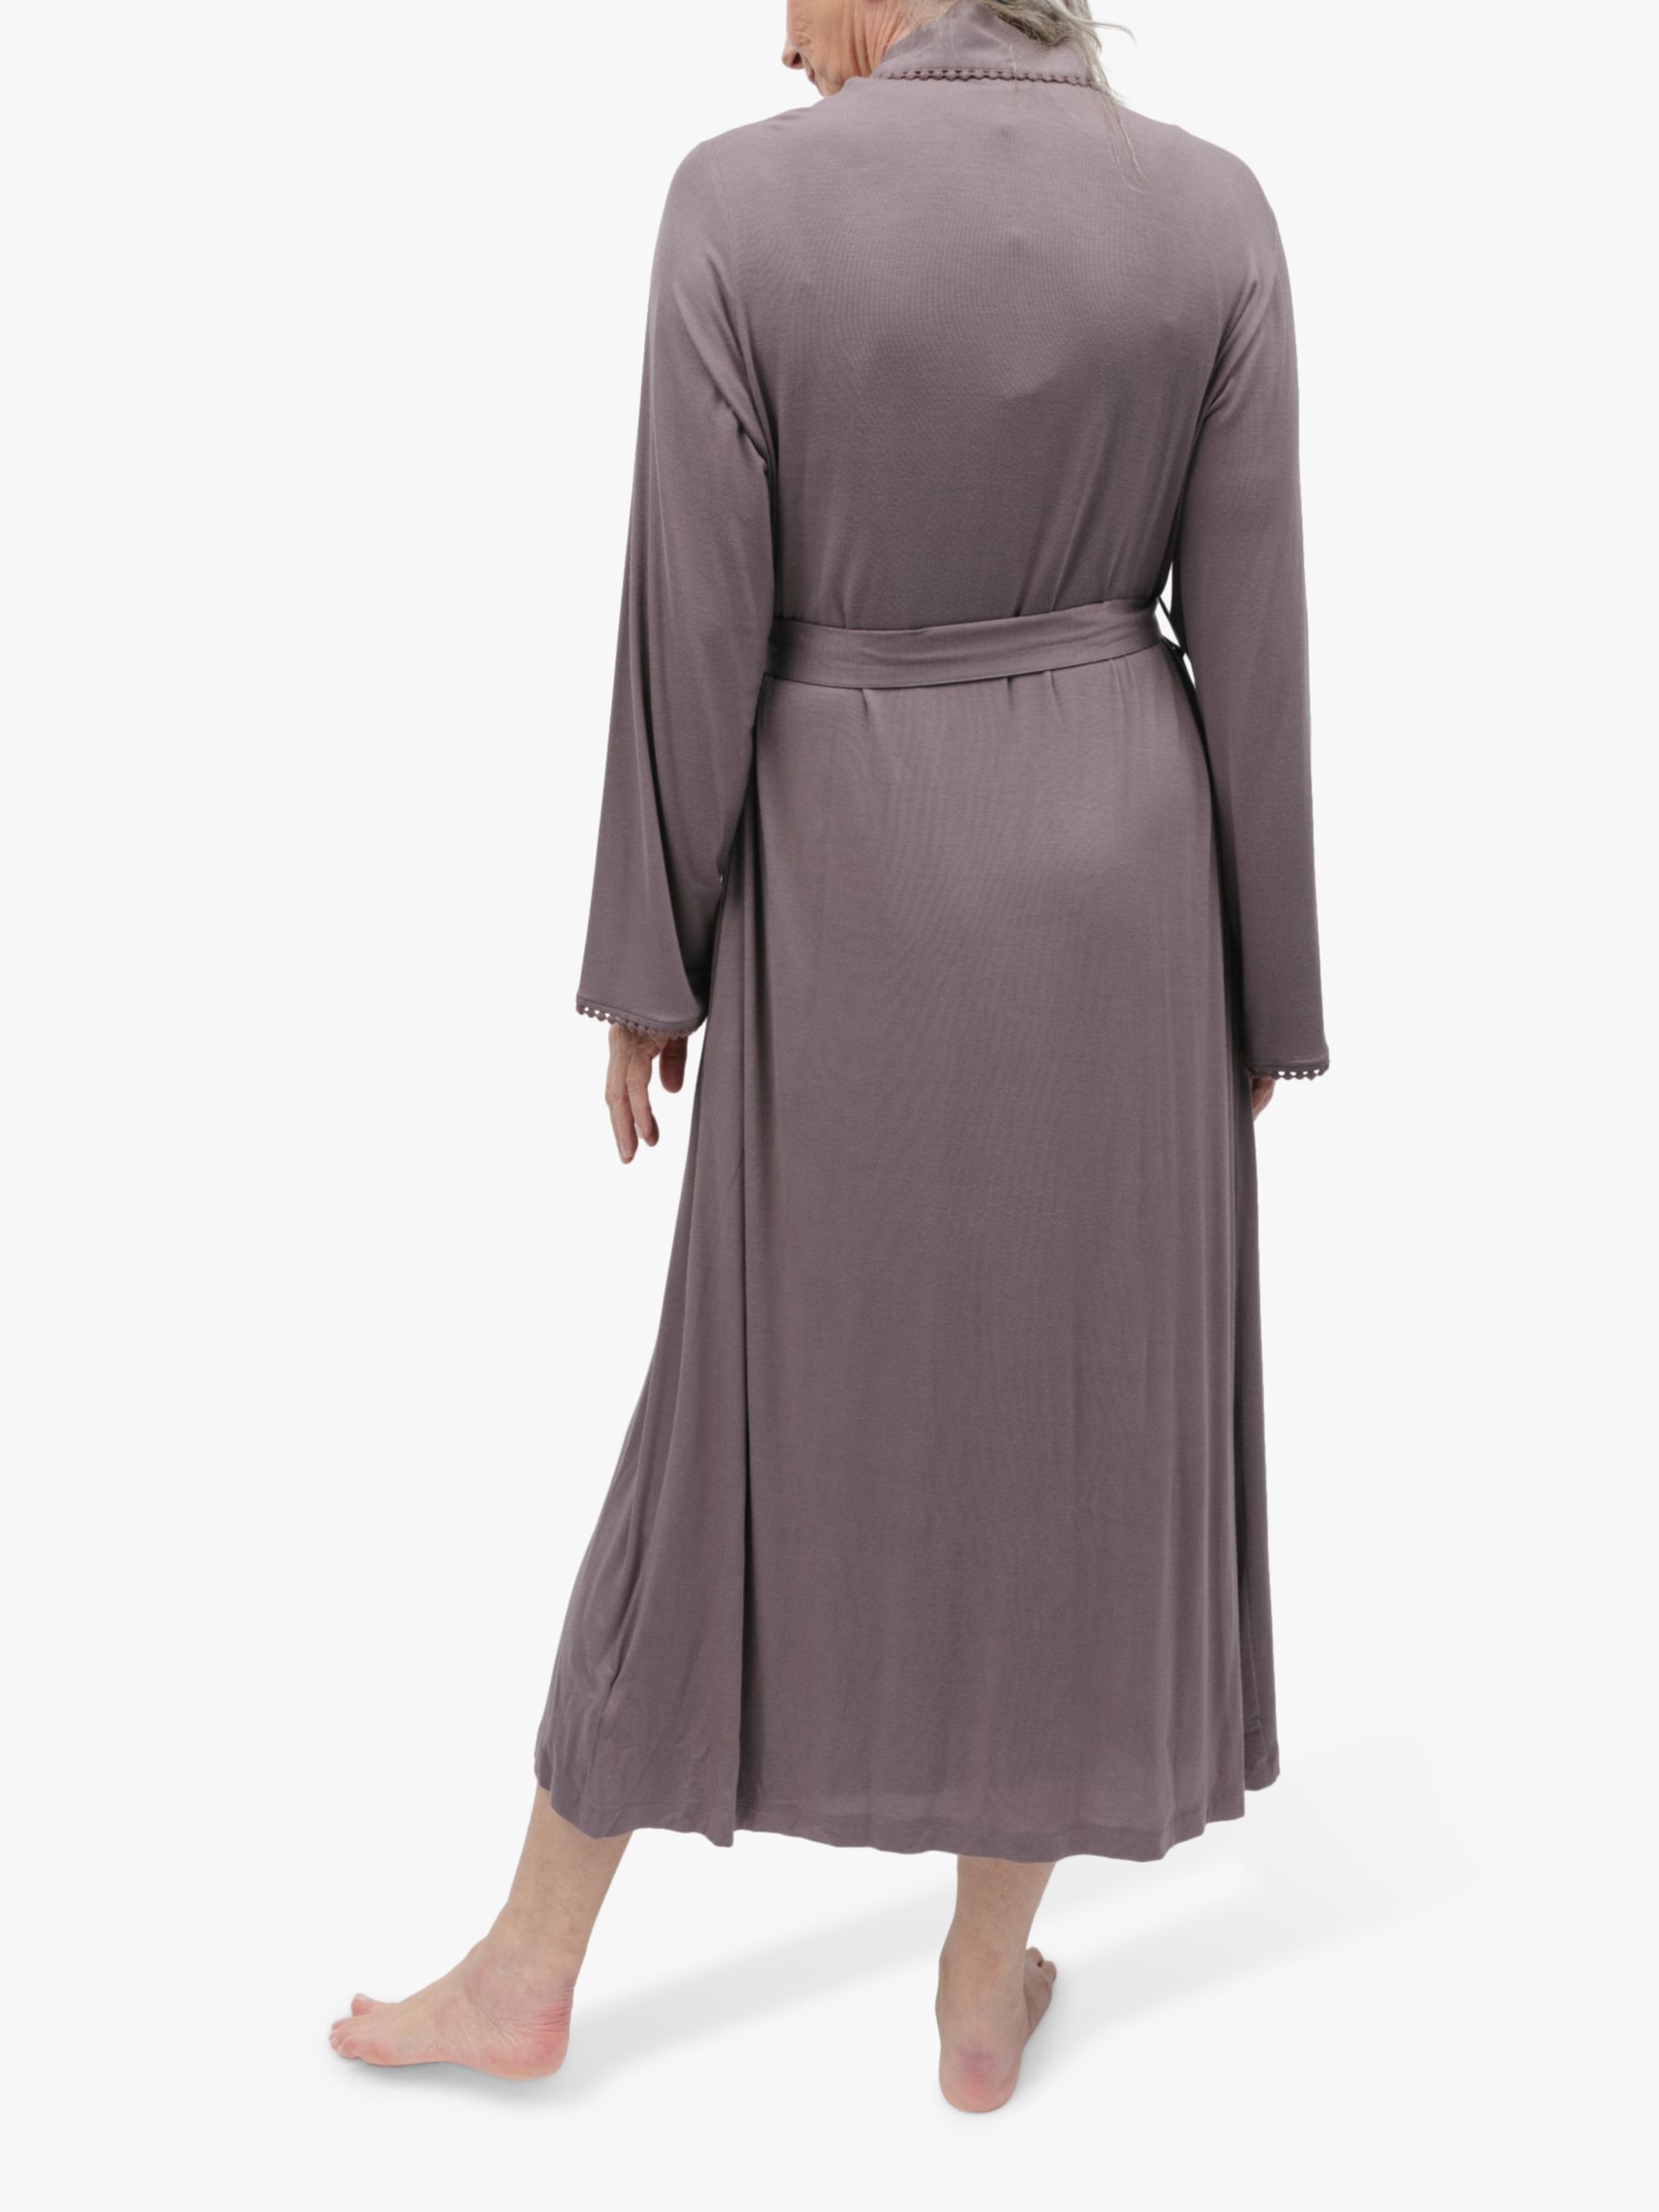 Buy Nora Rose by Cyberjammies Evette Long Dressing Gown, Taupe Online at johnlewis.com